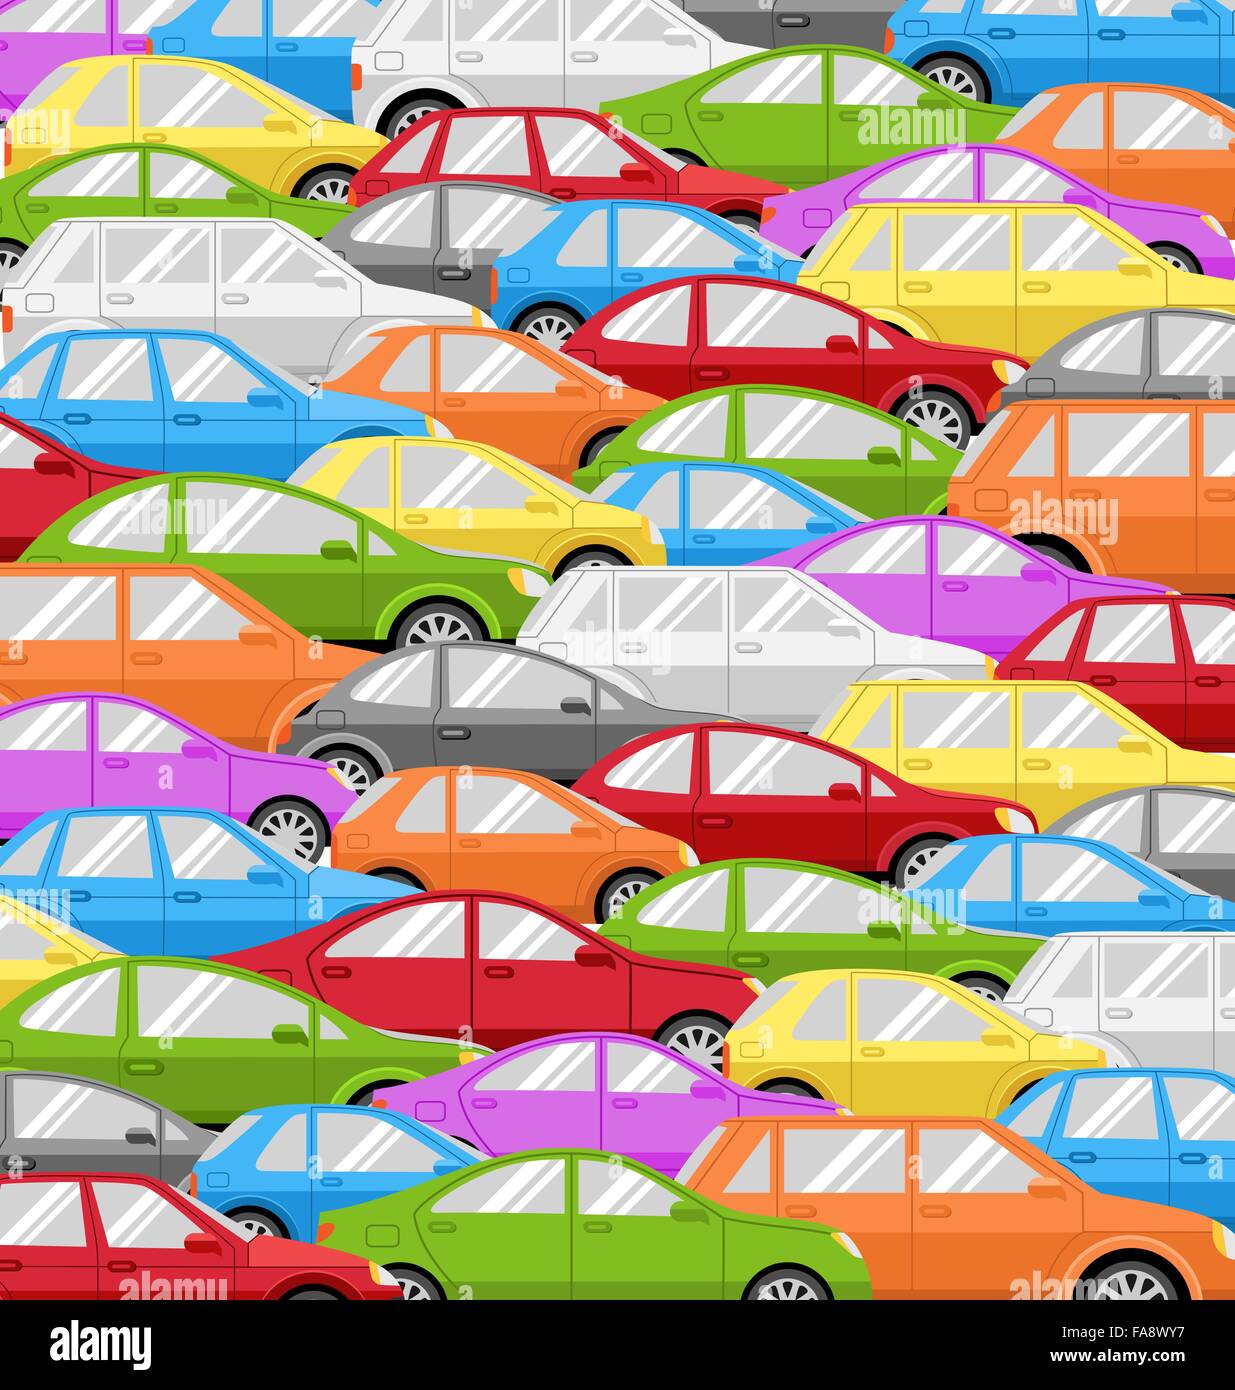 Traffic Jam With Cars. Road Background Stock Vector